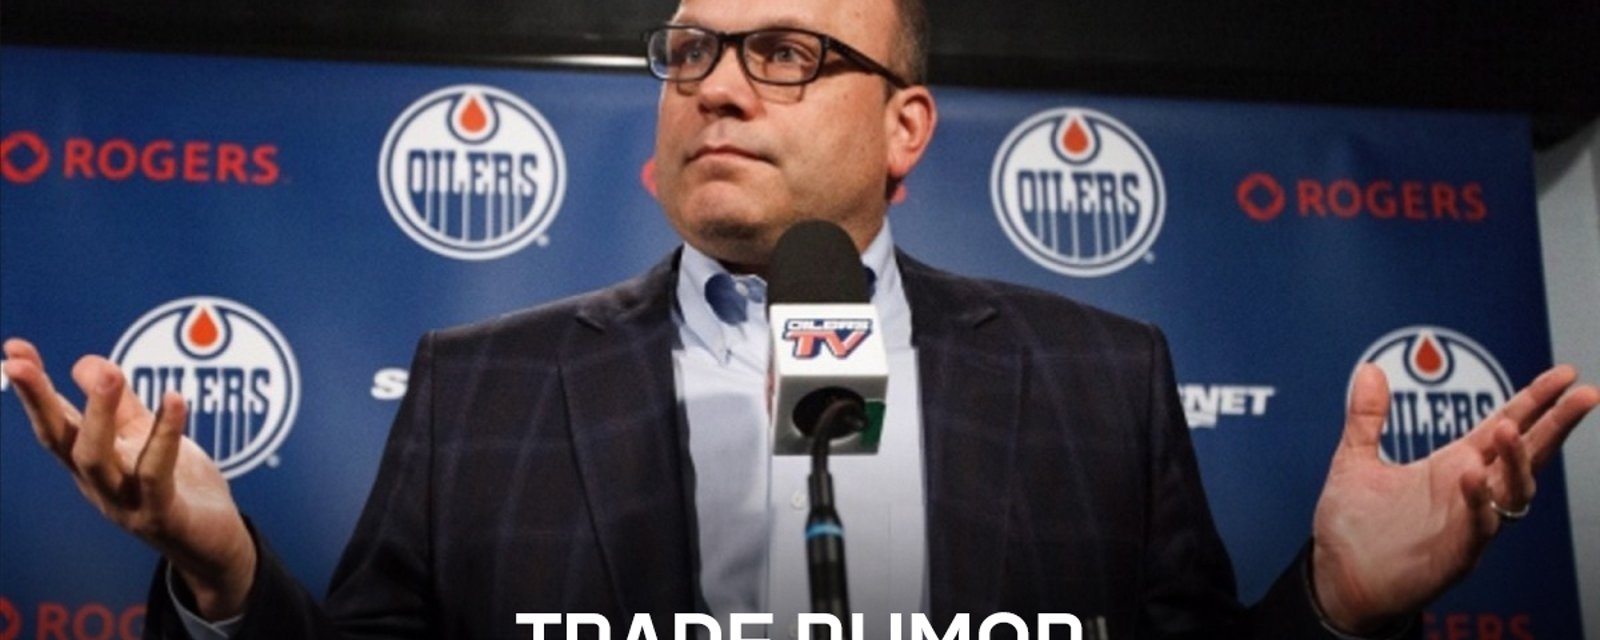 Oilers have notified NHL teams that veteran player is available for trade.